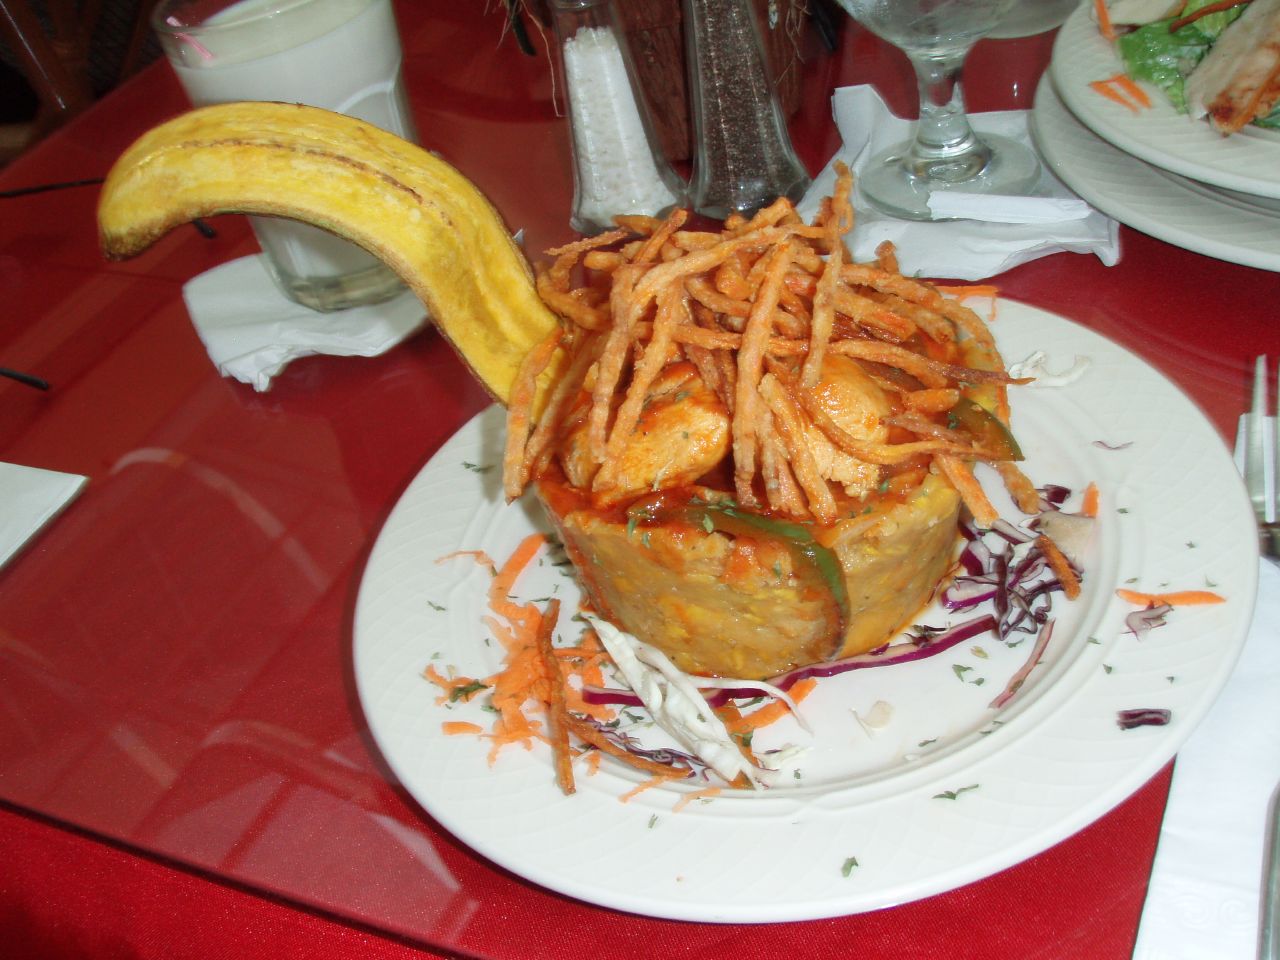 a plate with french fries and fruit on it